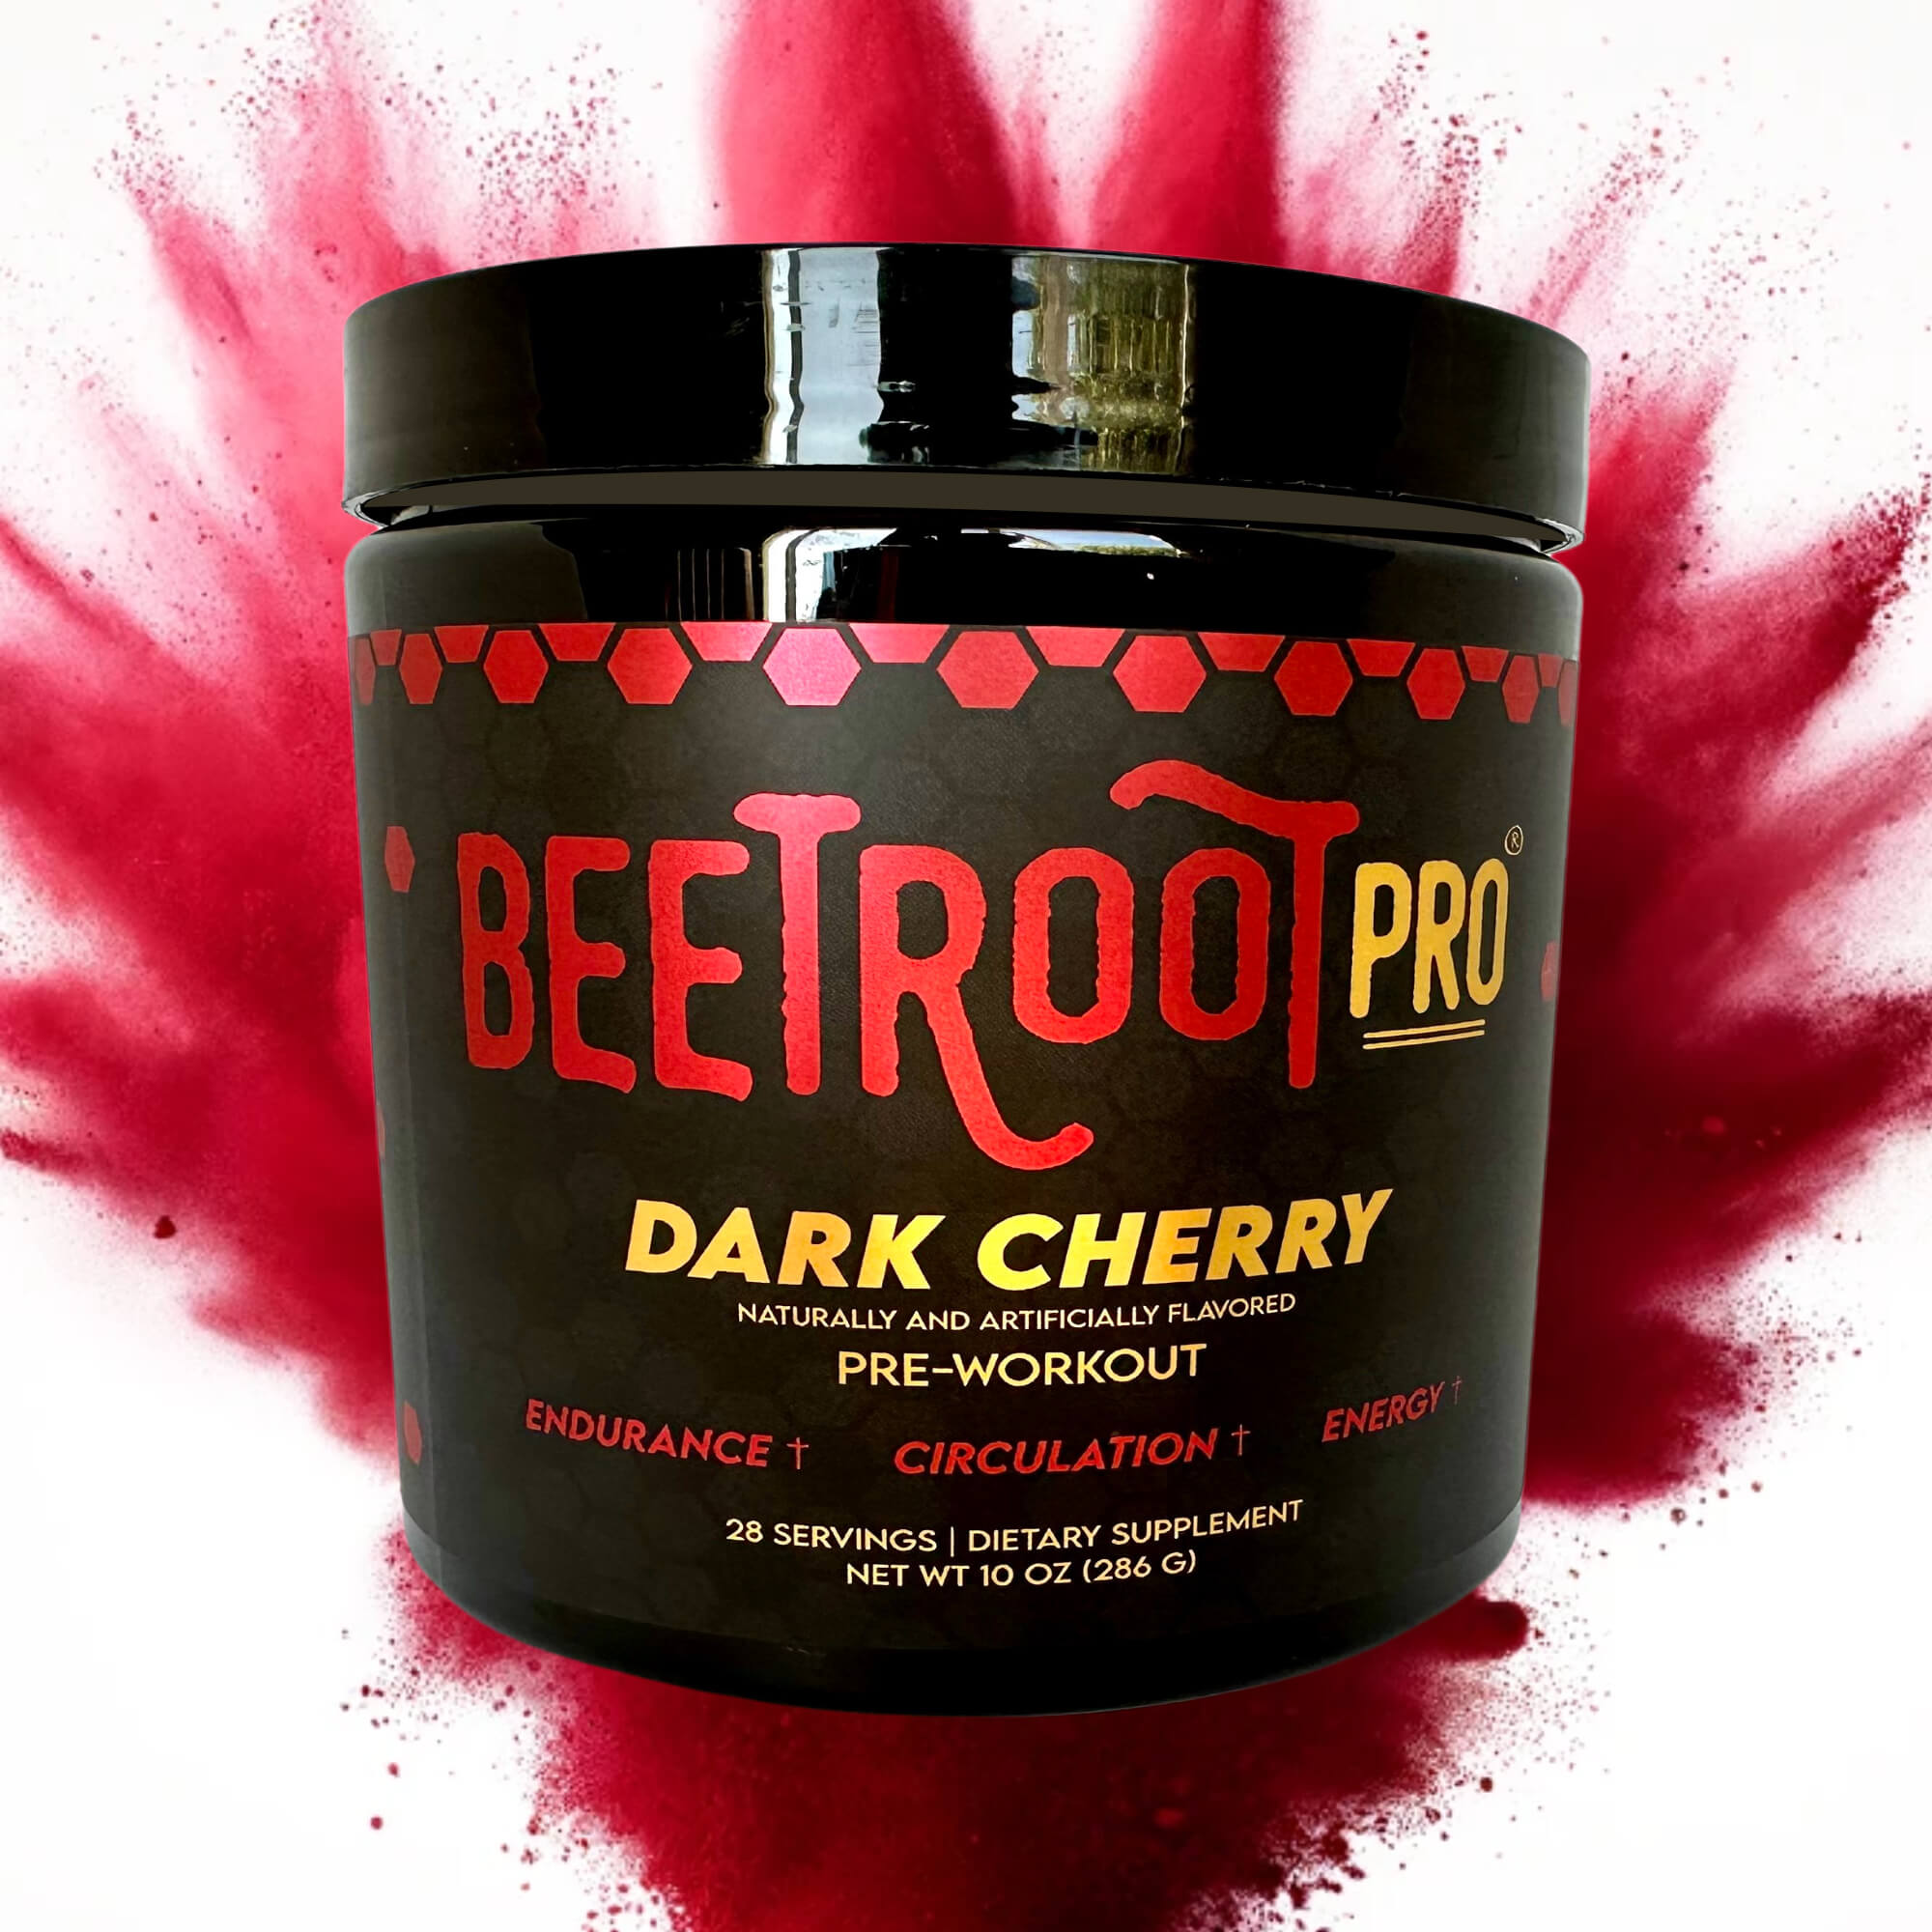 Beetroot Pro® Dark Cherry for Endurance, Nitric Oxide and Blood Flow